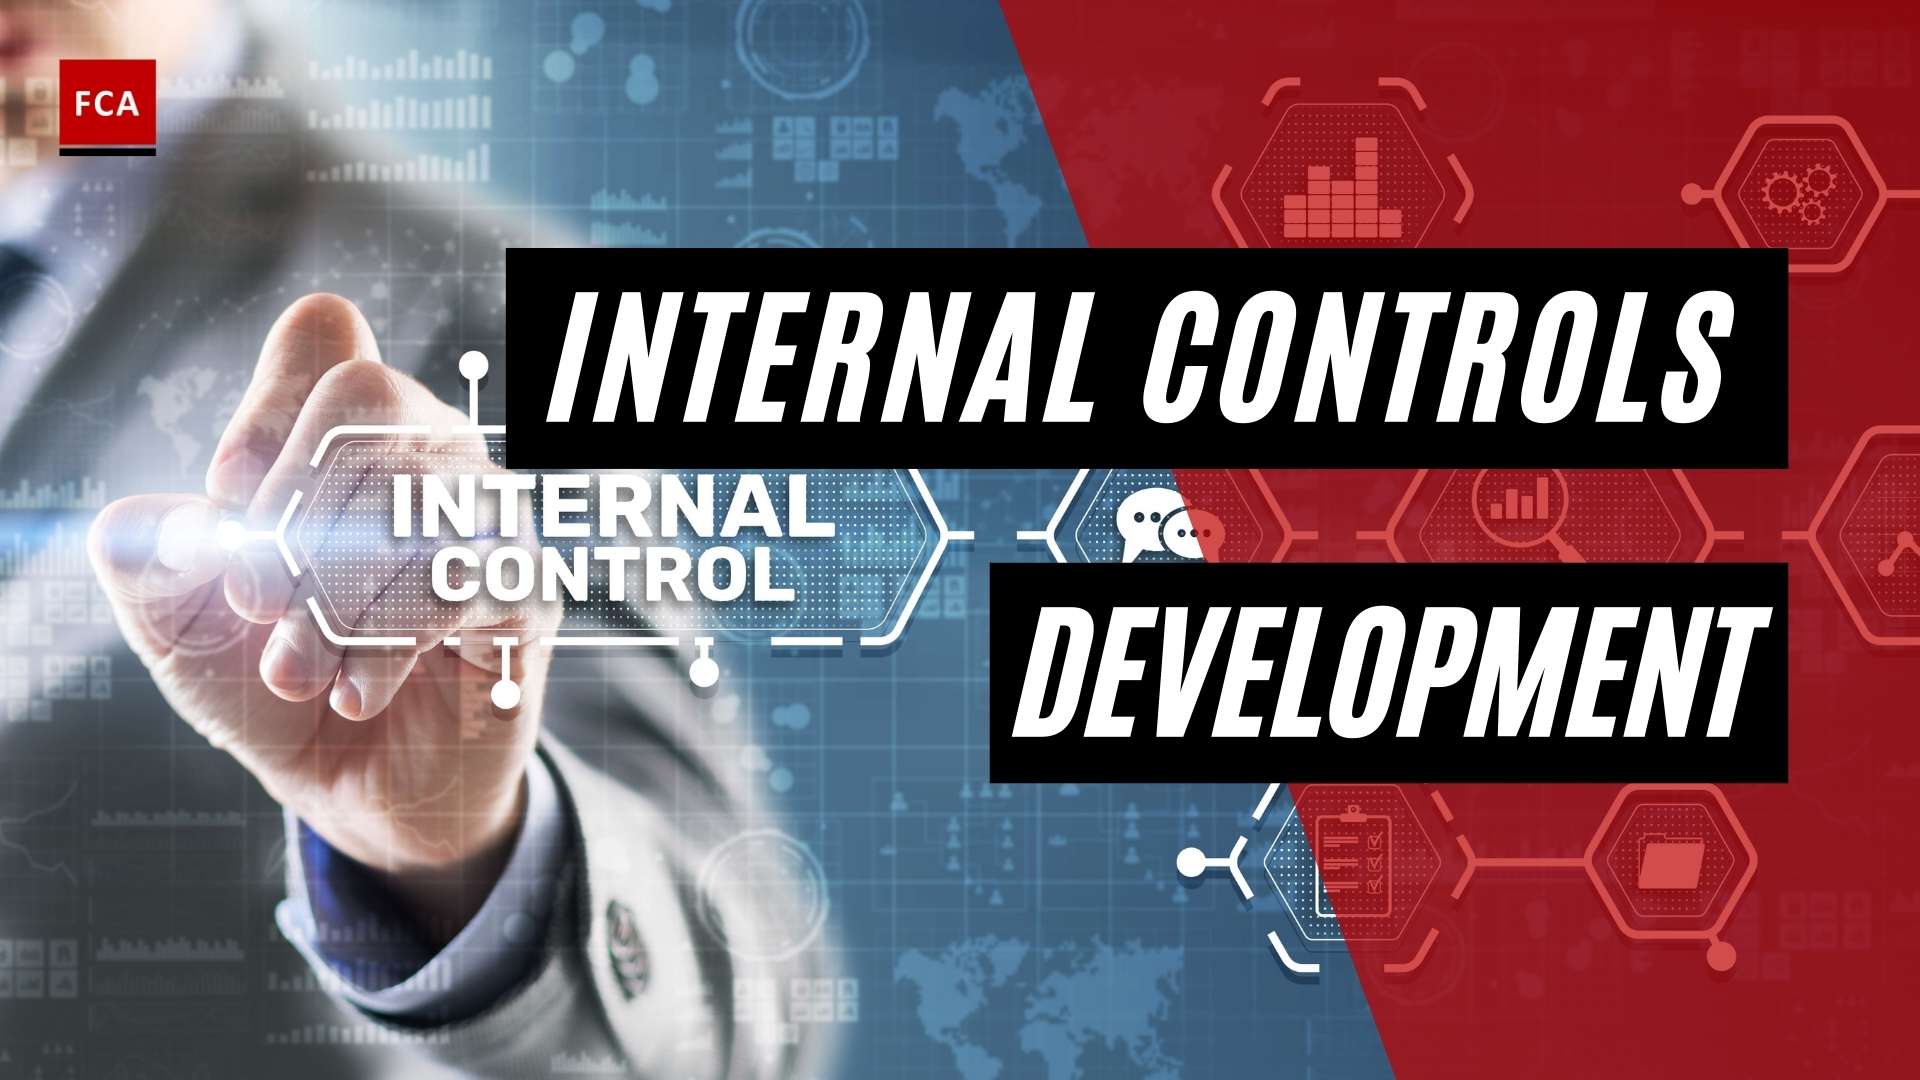 Key Considerations In Developing Internal Controls - Featured Image